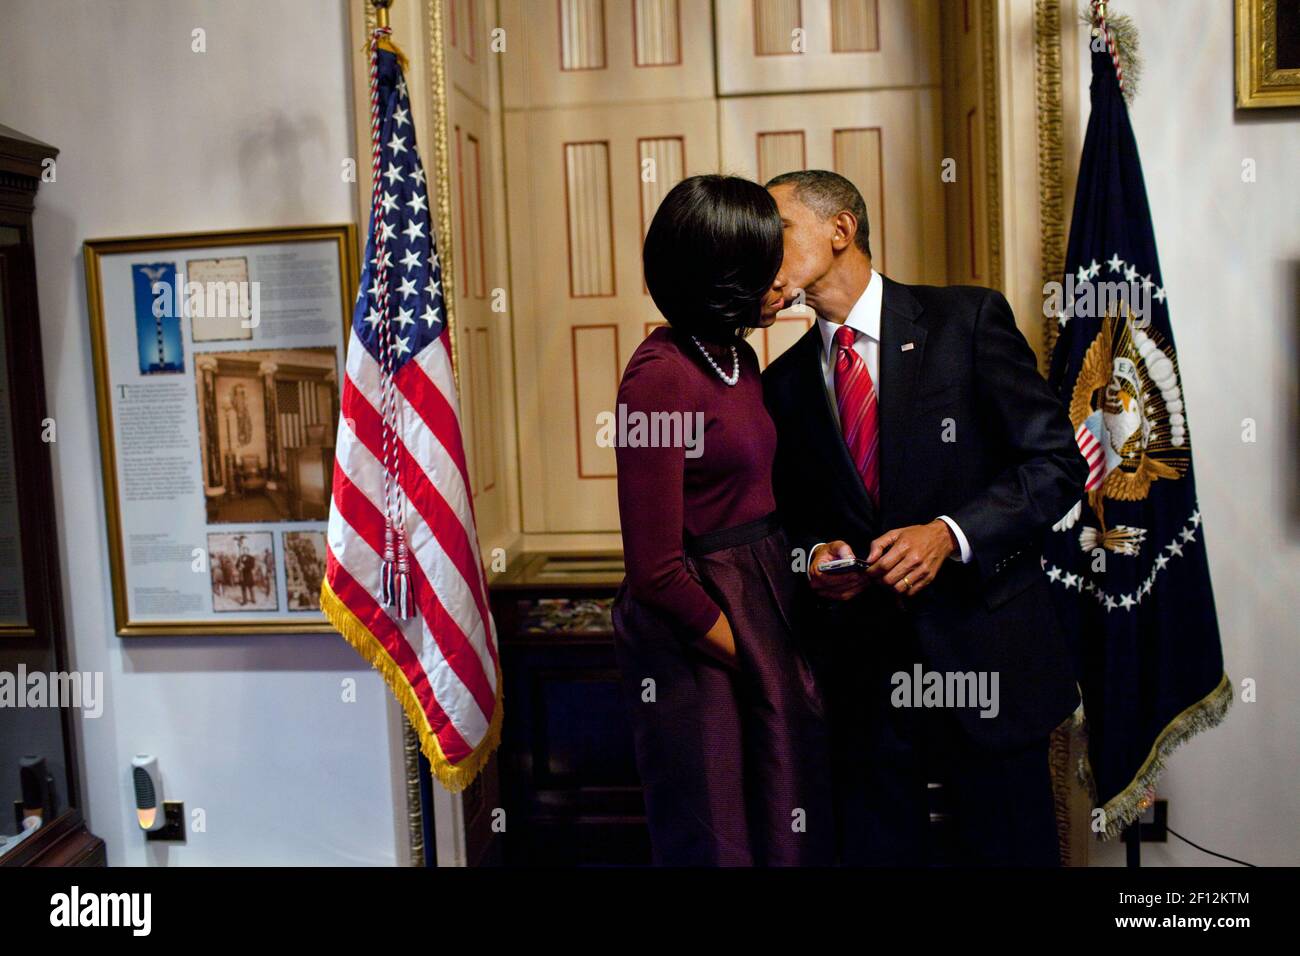 President Barack Obama kisses First Lady Michelle Obama in a holding room at the Capitol after delivering his first State of the Union address to a joint session of Congress Jan. 27 2010. Stock Photo